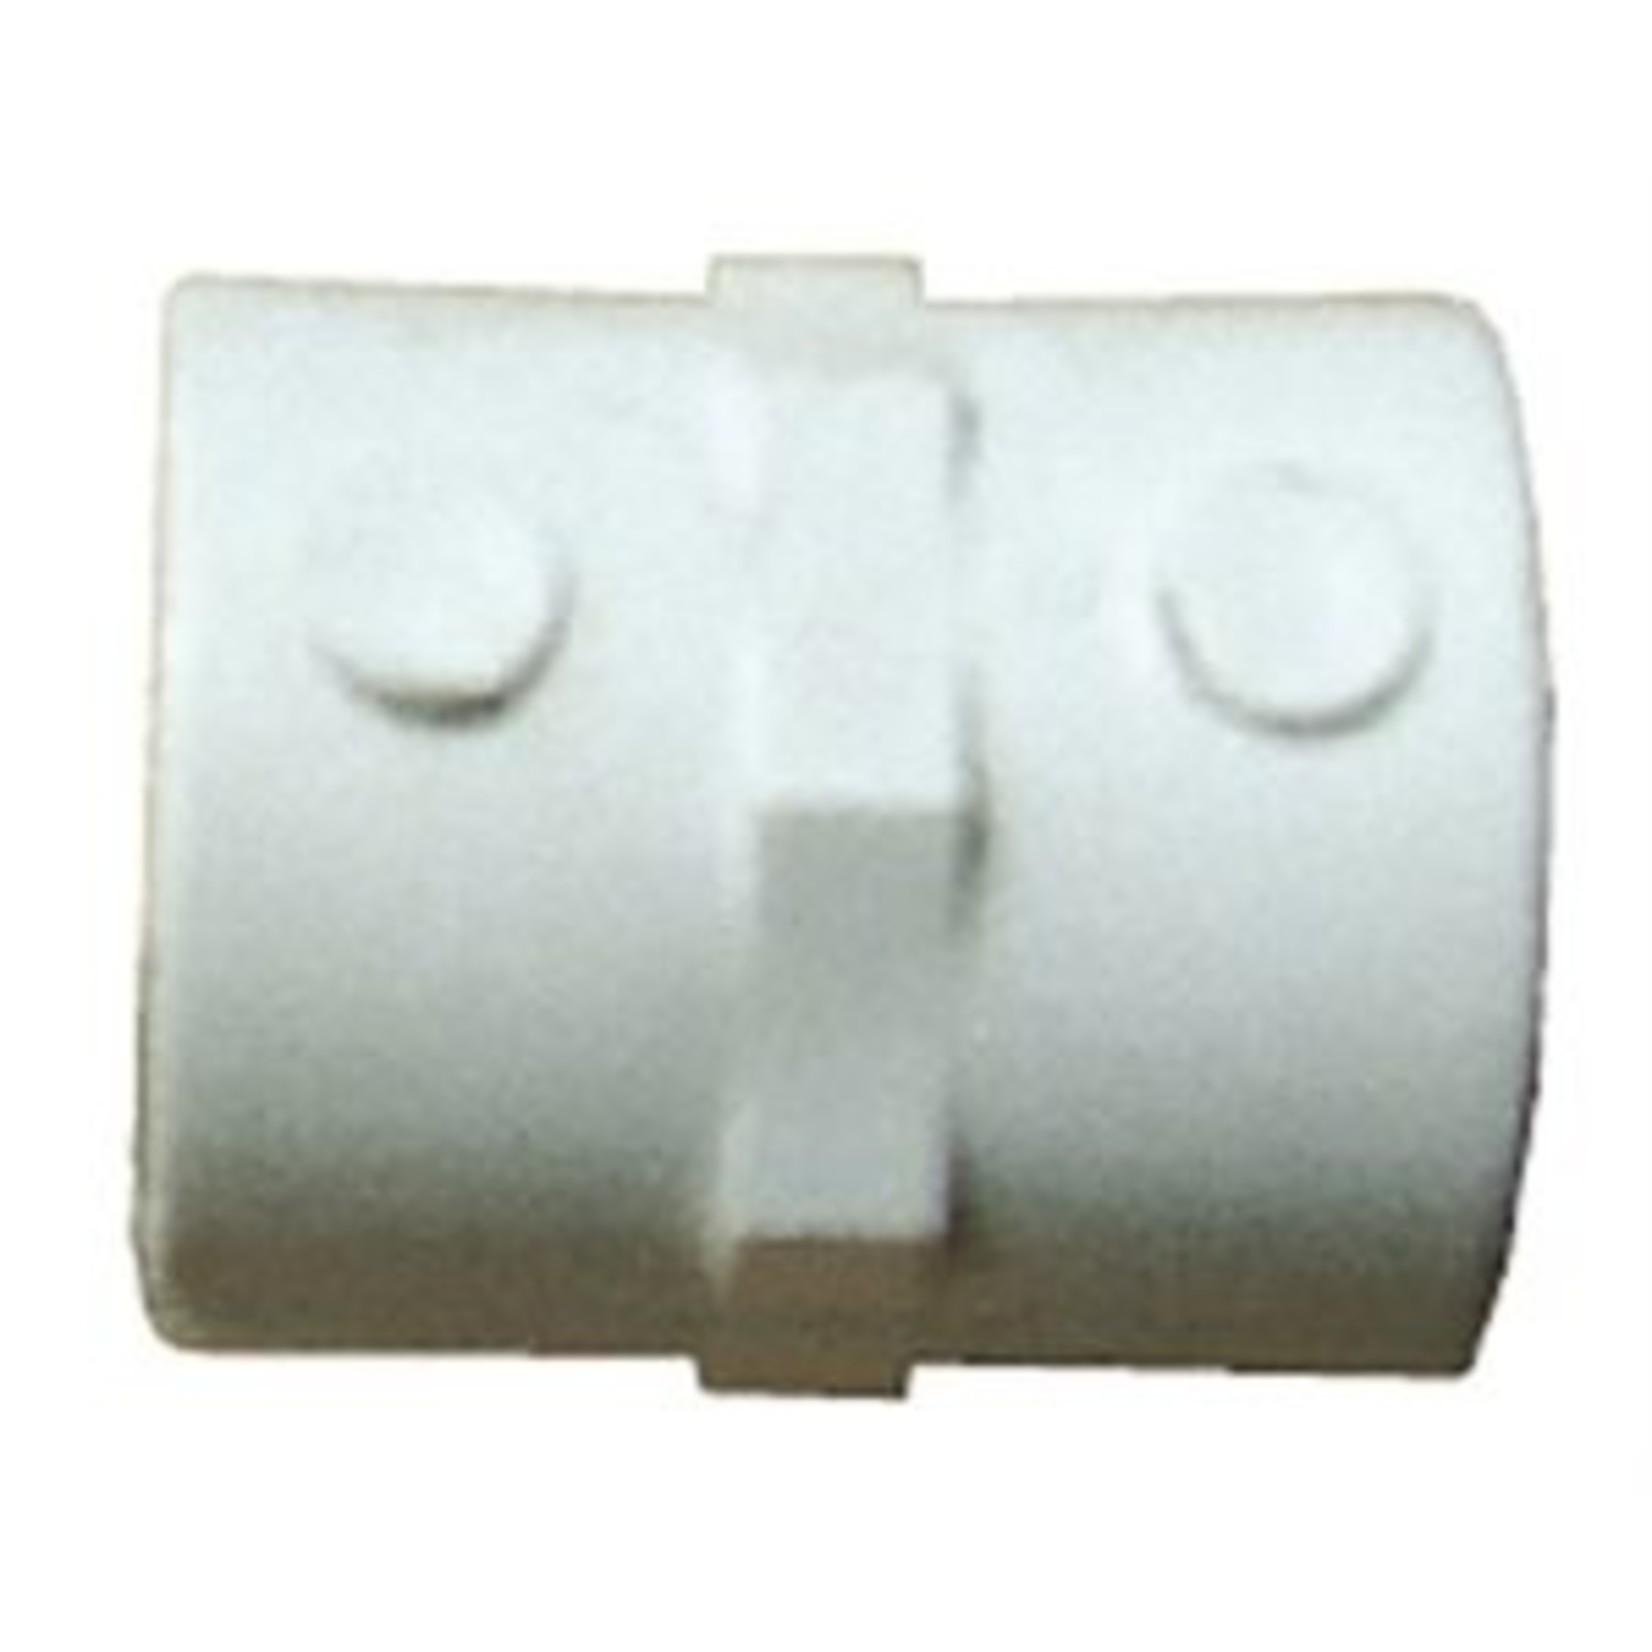 MAG DRIVE HOSE INSERT ADAPTER 1 / 2''